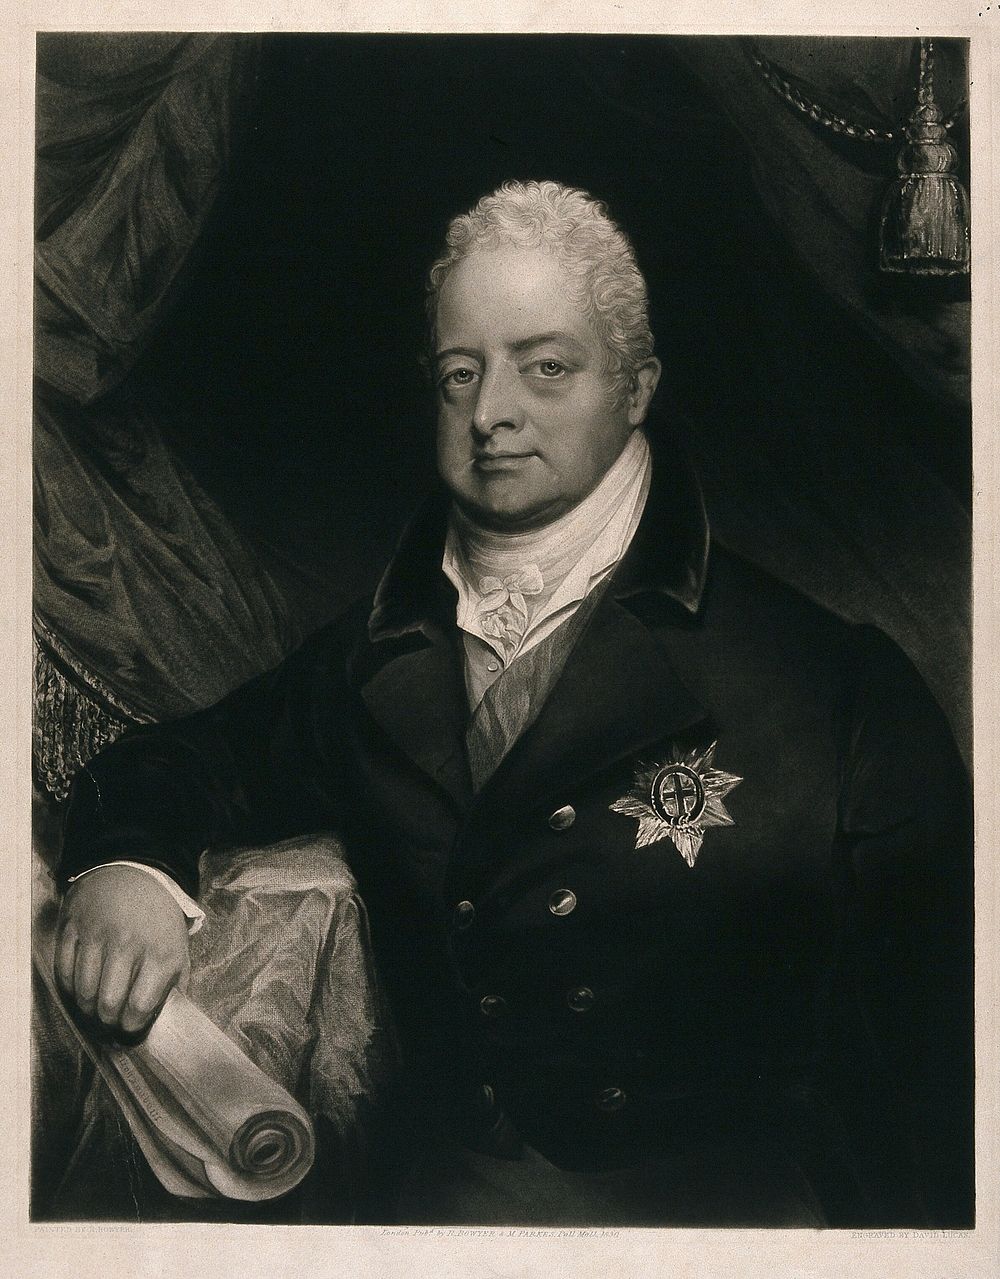 King William IV holding a scroll of the Magna Carta in his right hand. Mezzotint by D. Lucas after R. Bowyer, 1830.